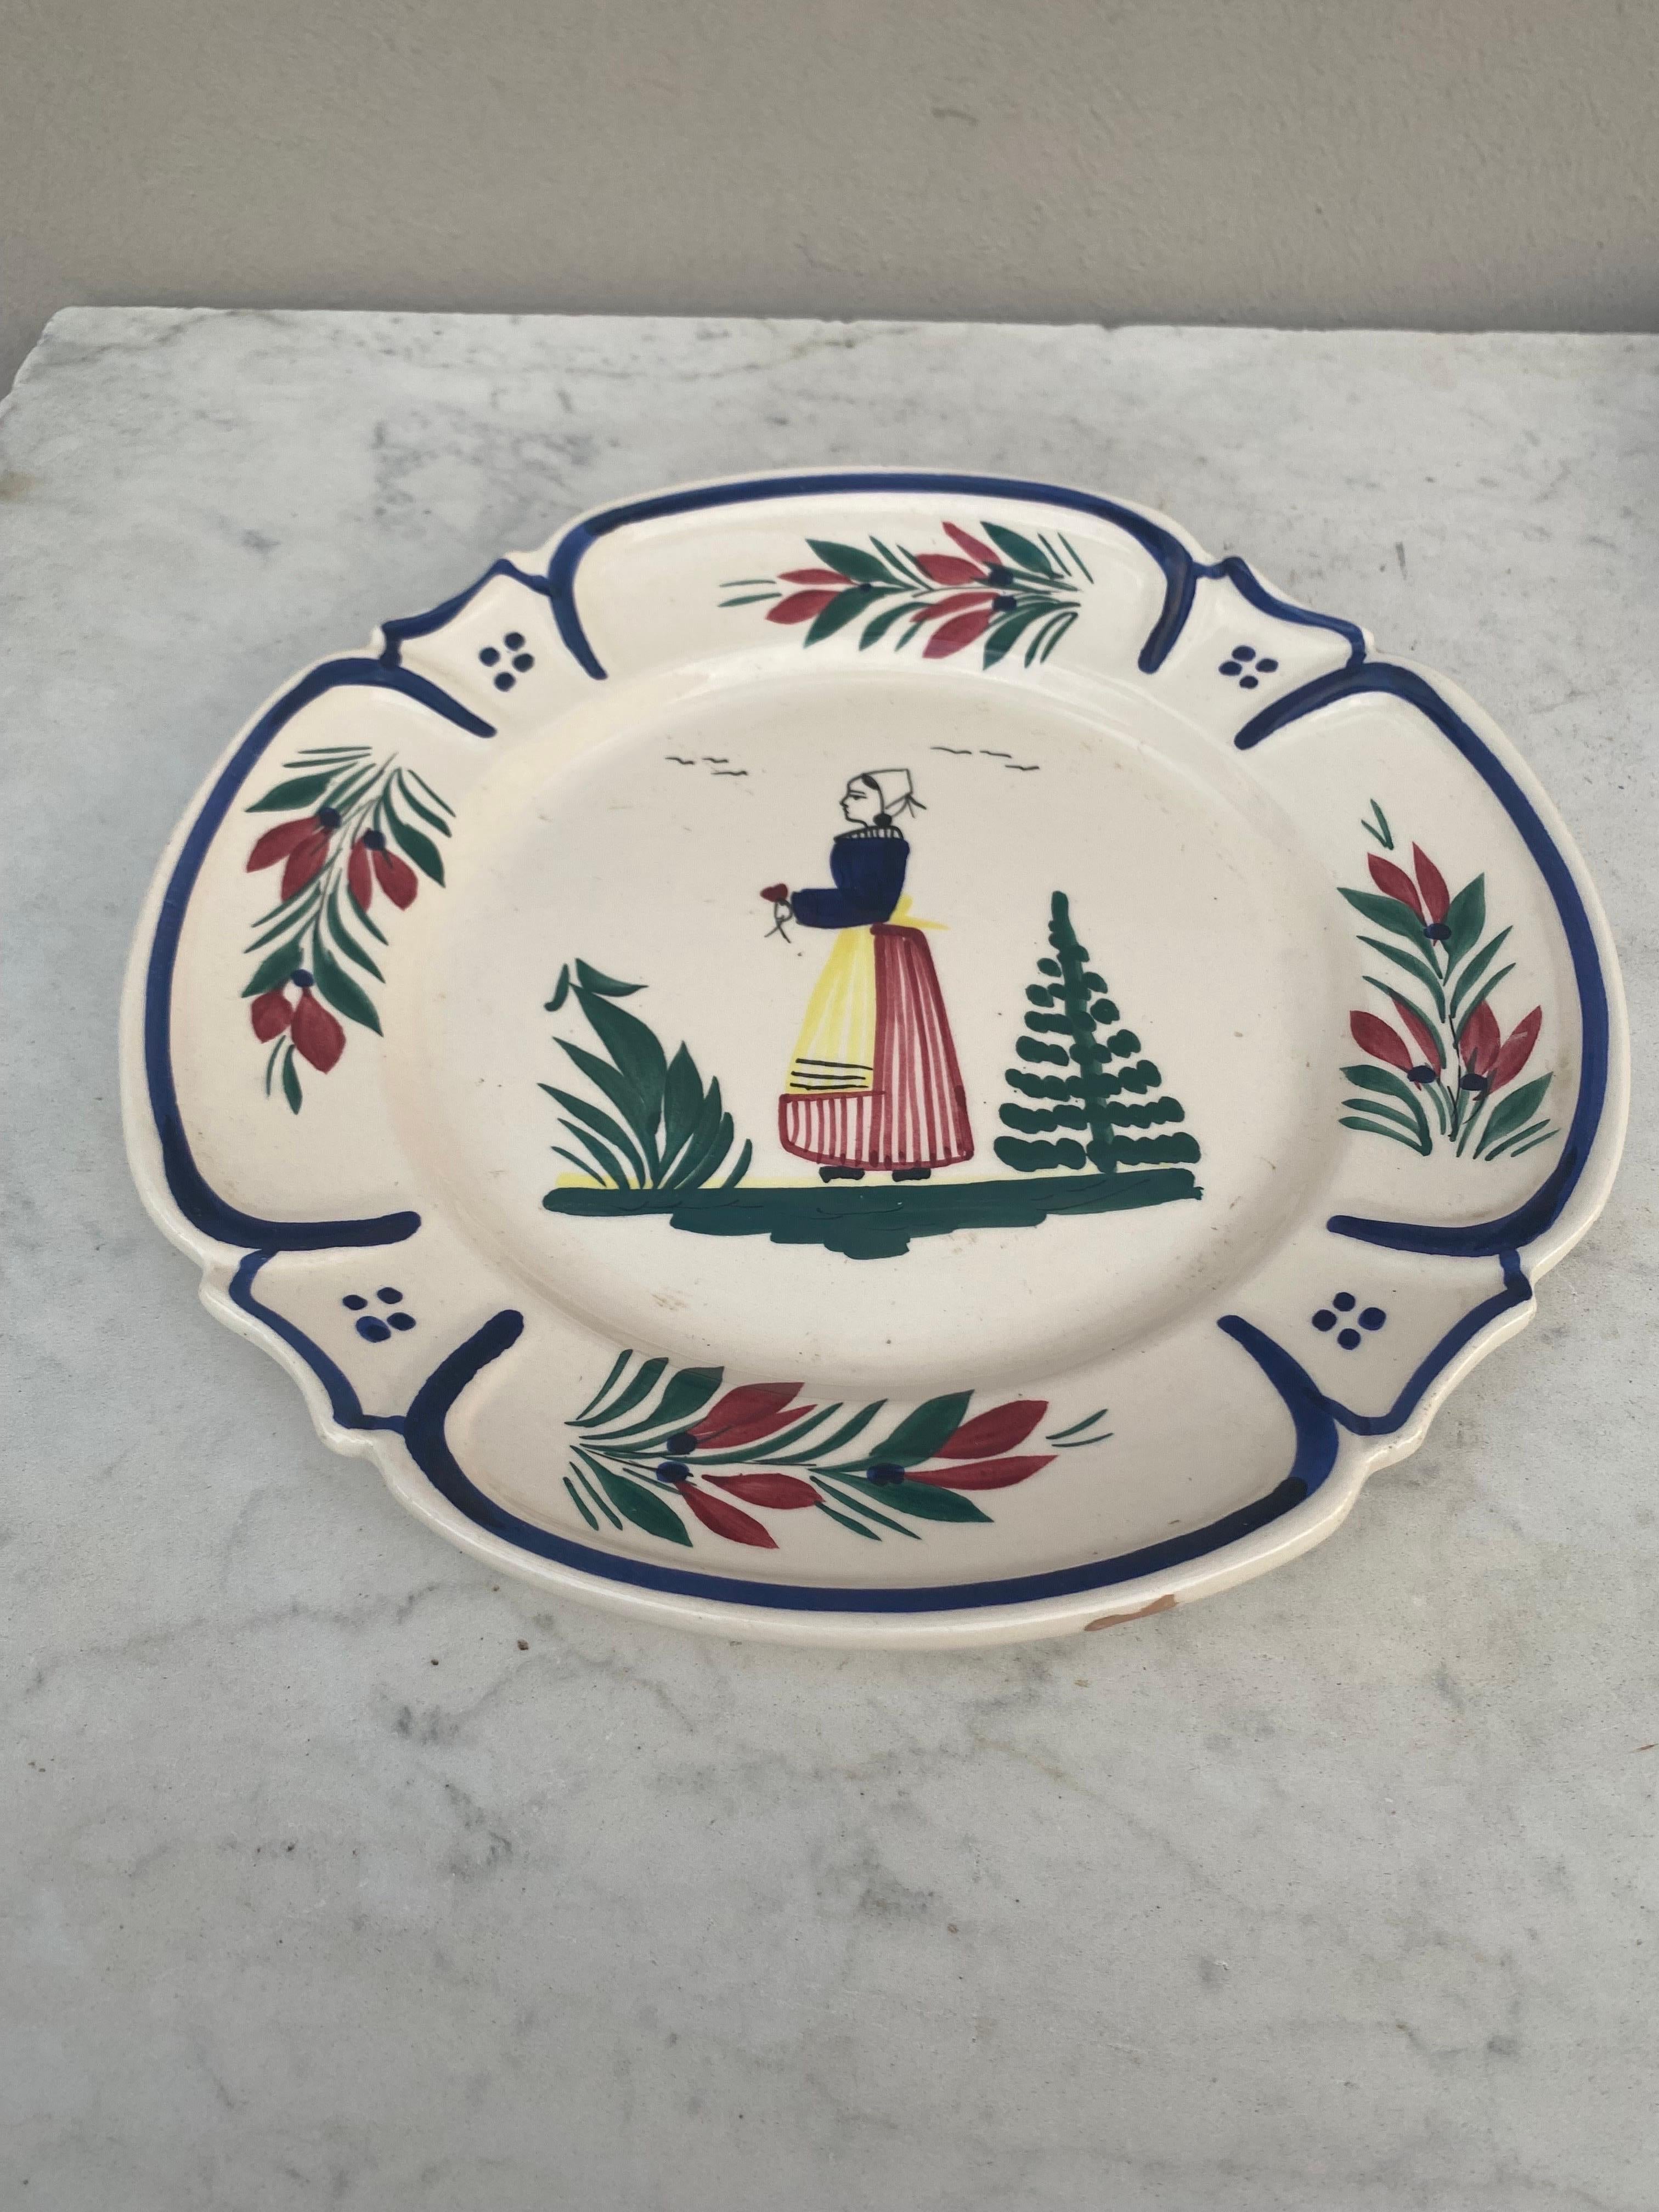 French Faience plate quimper circa 1960.
Breton with flowers.